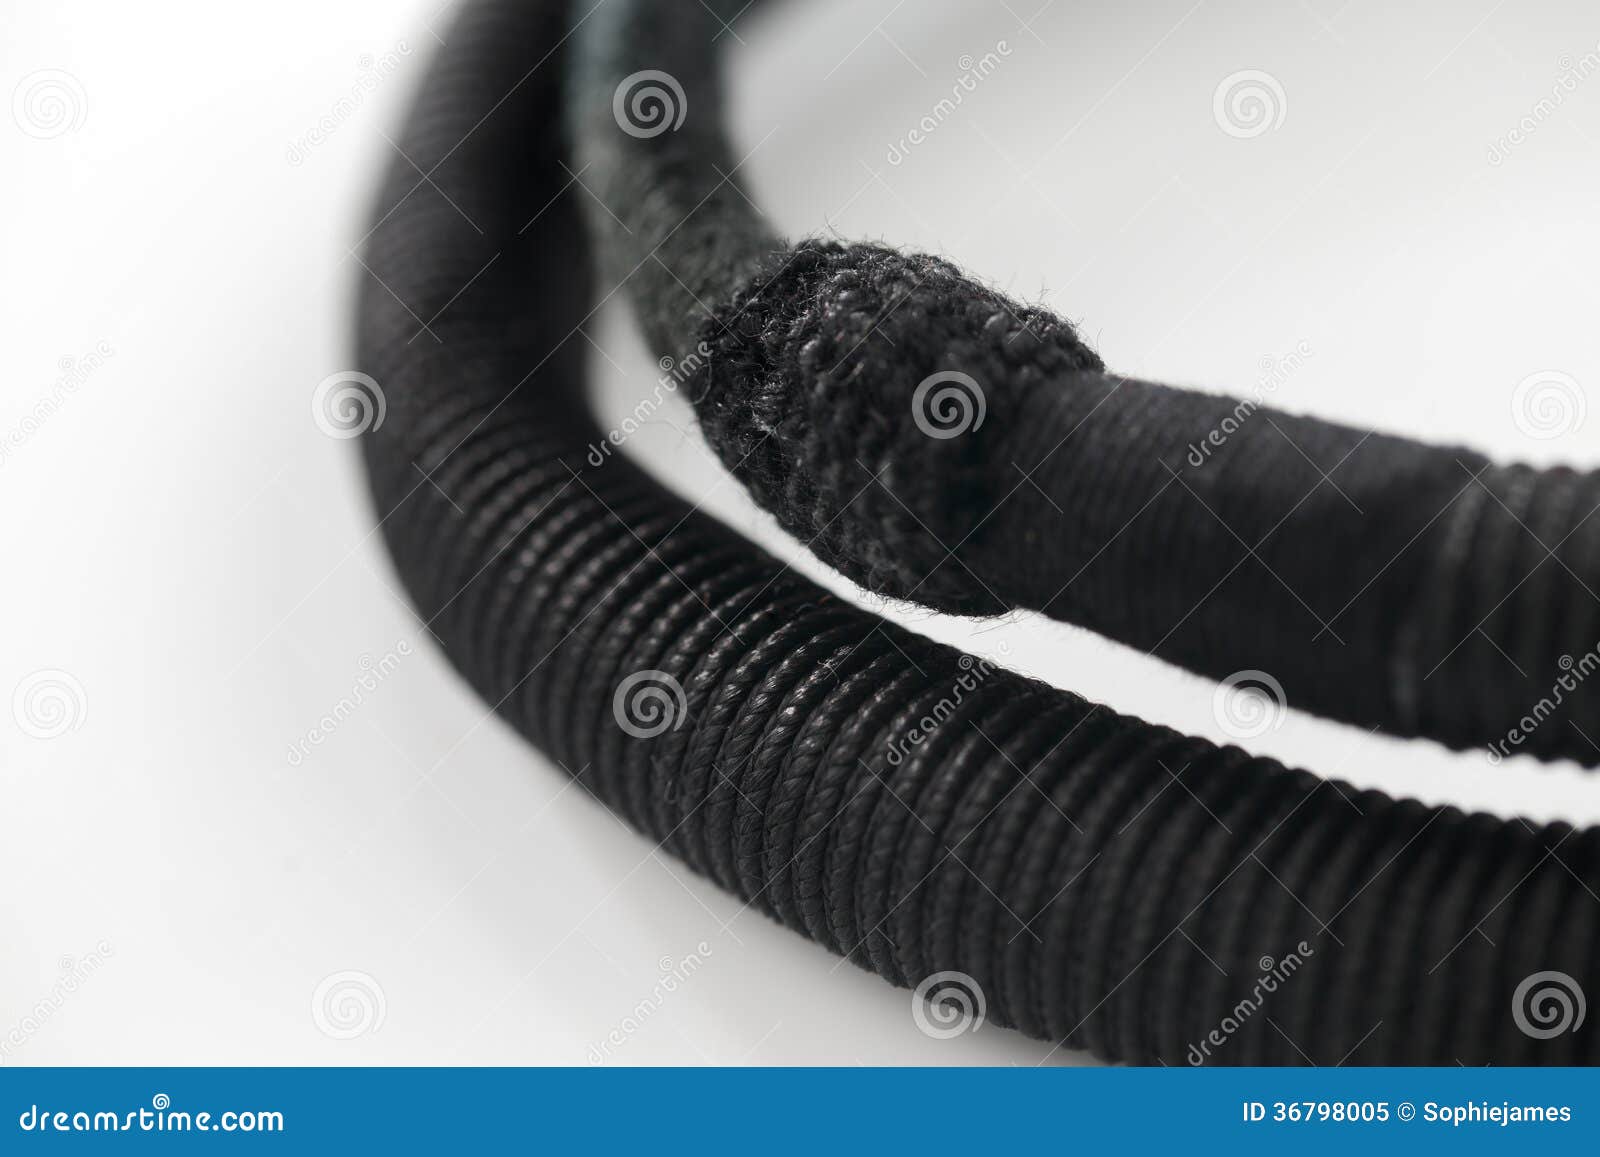 the agal is a black doubled cord, worn on head usually by arab men